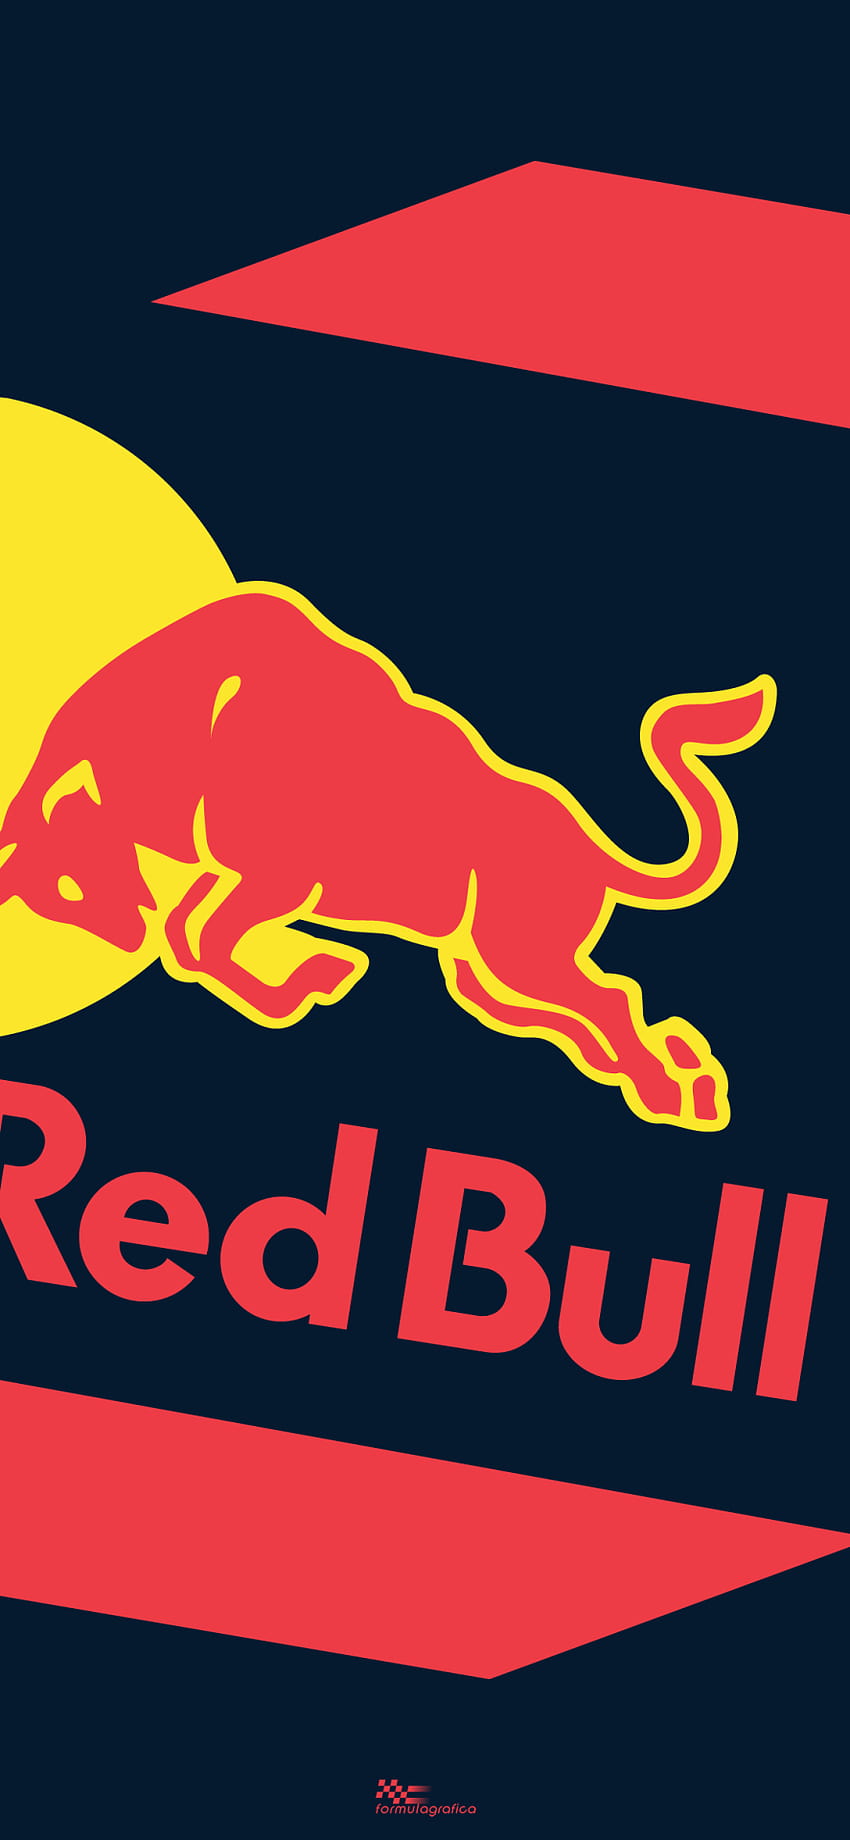 Iphone / Smartphone, red bull android HD phone wallpaper